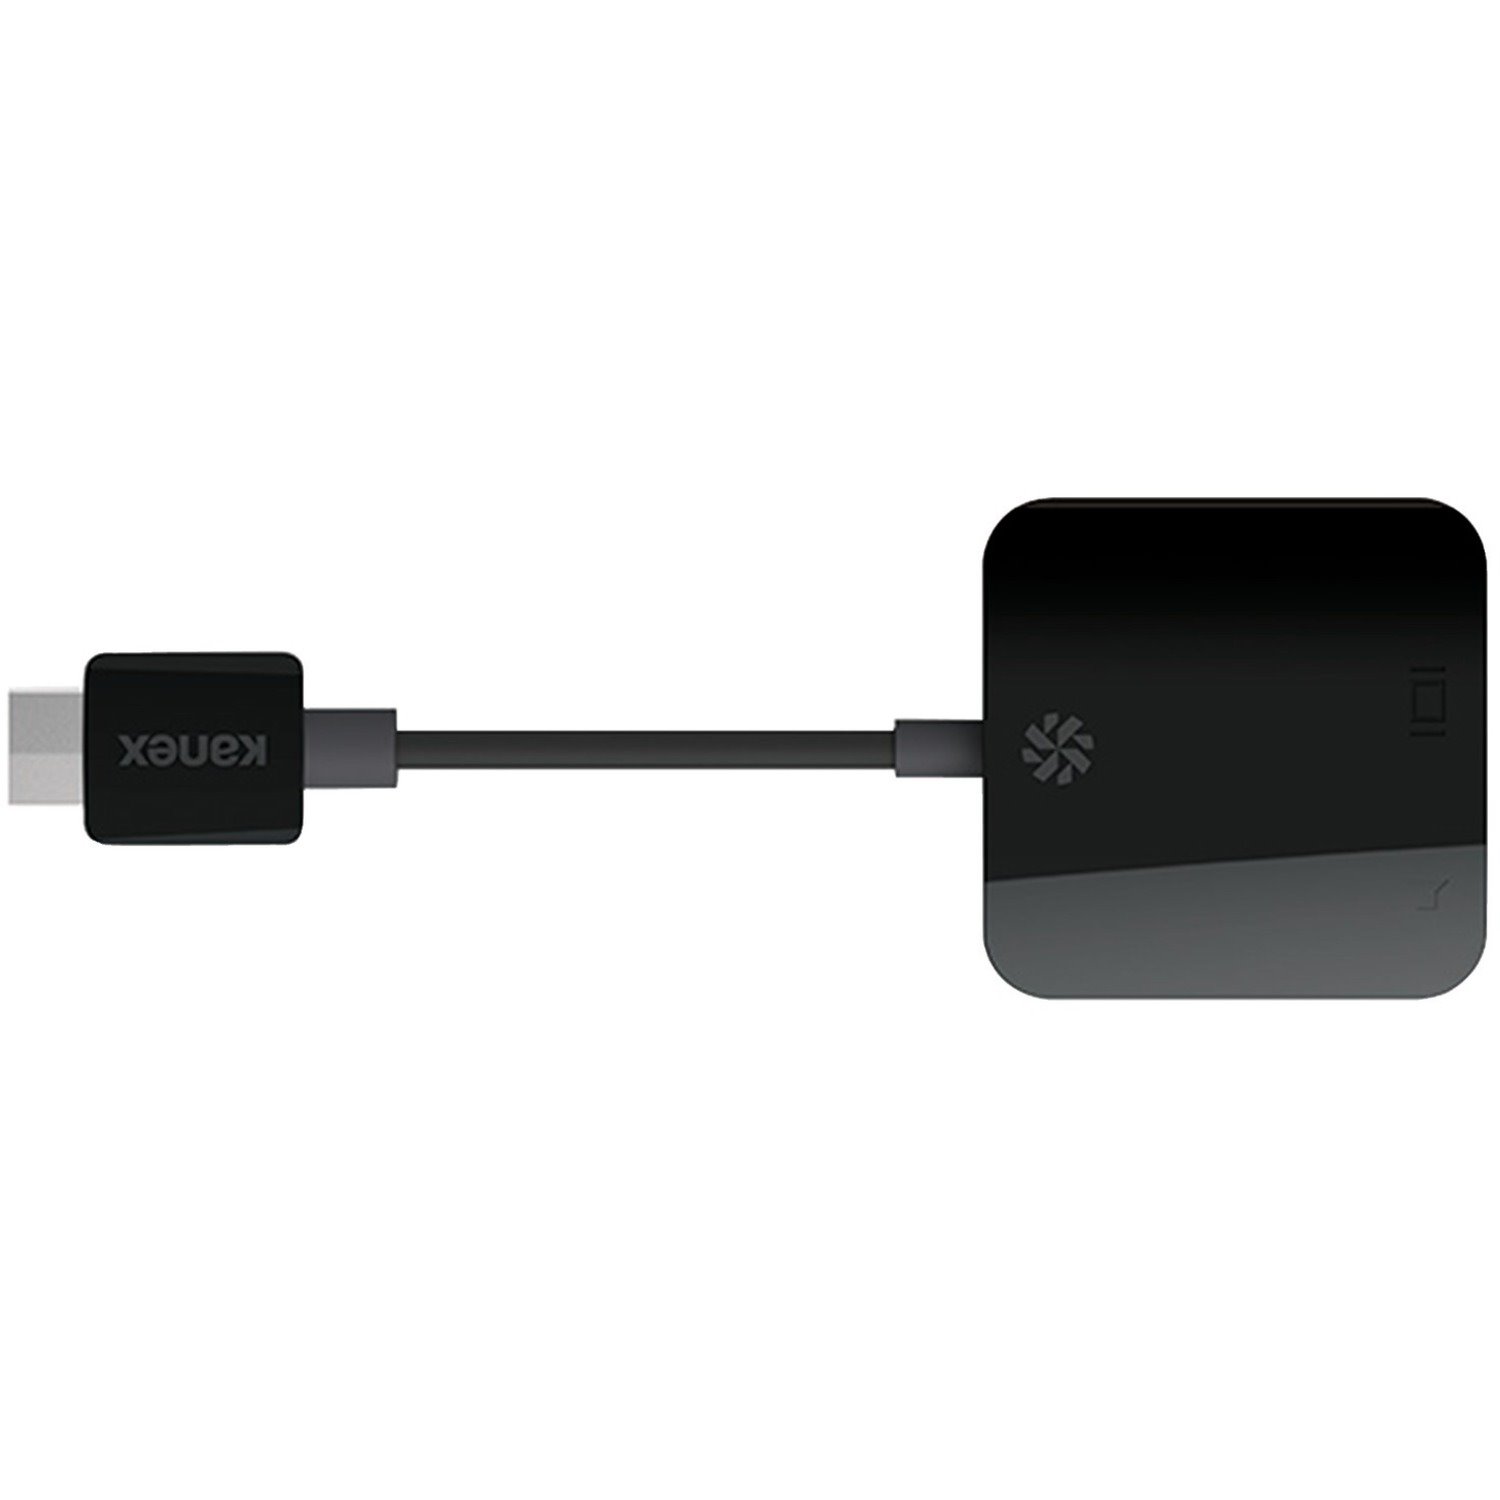 Kanex HDMI to VGA Adapter For New Apple TV